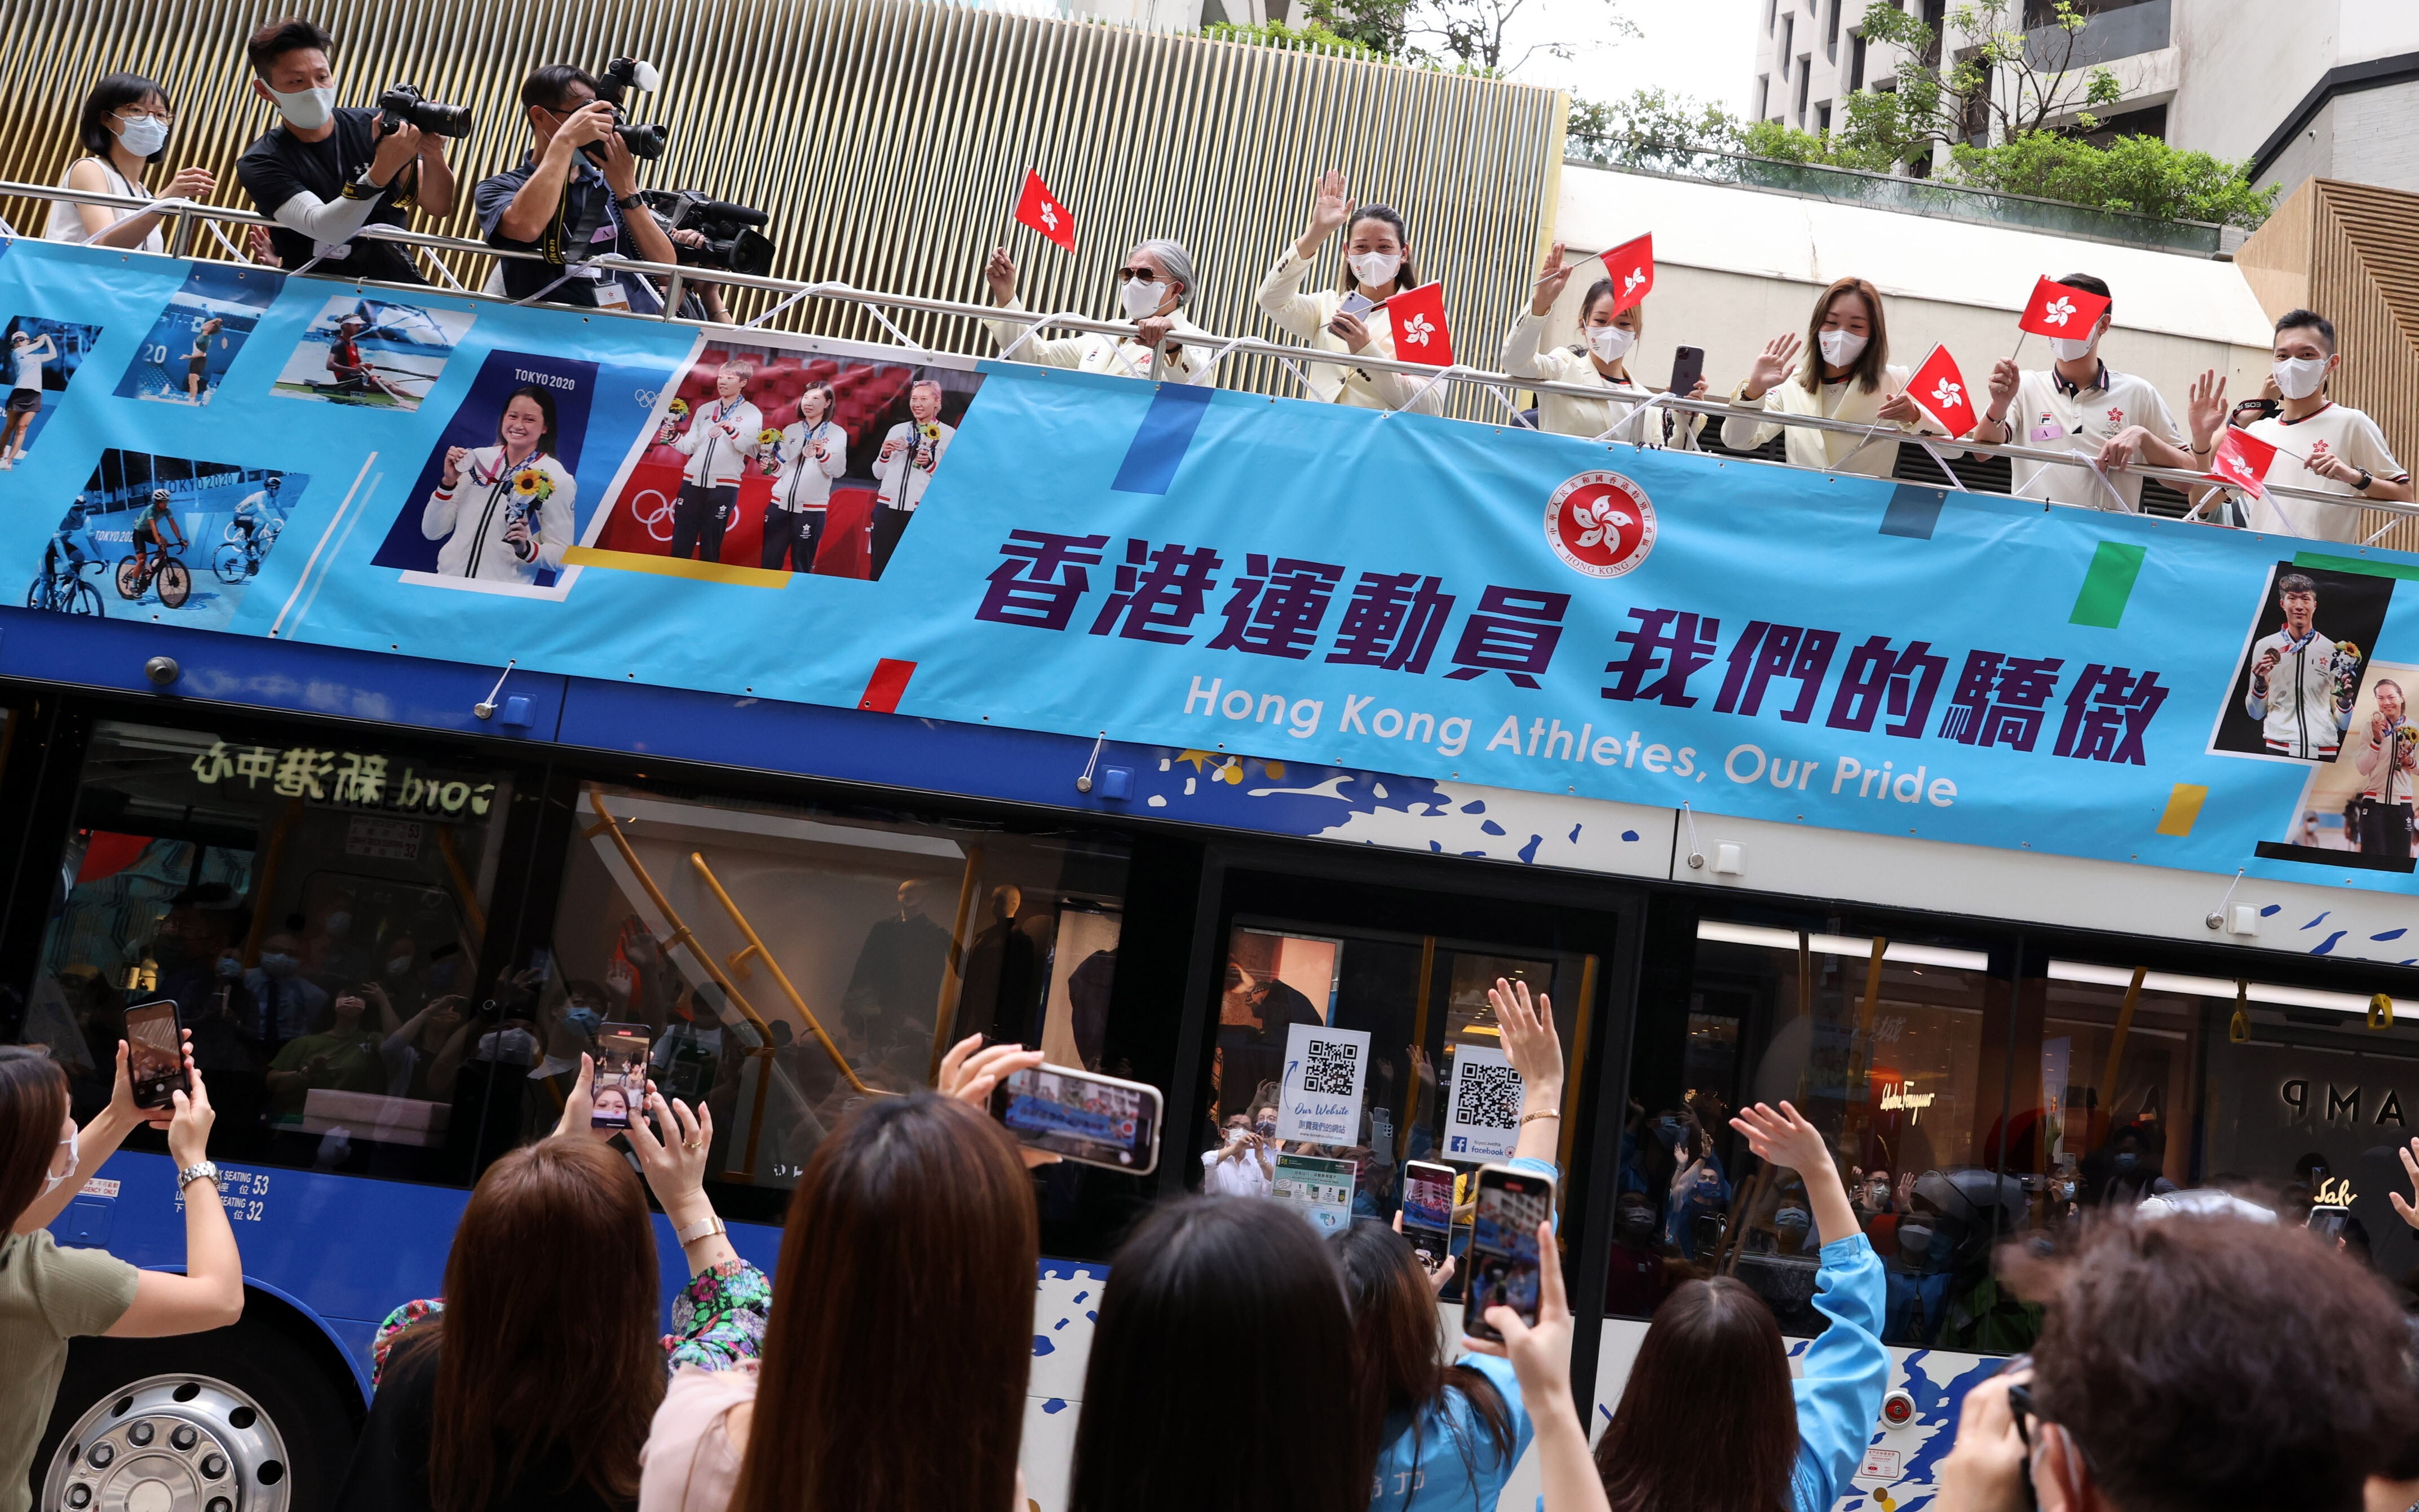 Hong Kong residents snap photos as the city’s Olympic team rolls along Thursday’s parade route. Photo: Nora Tam